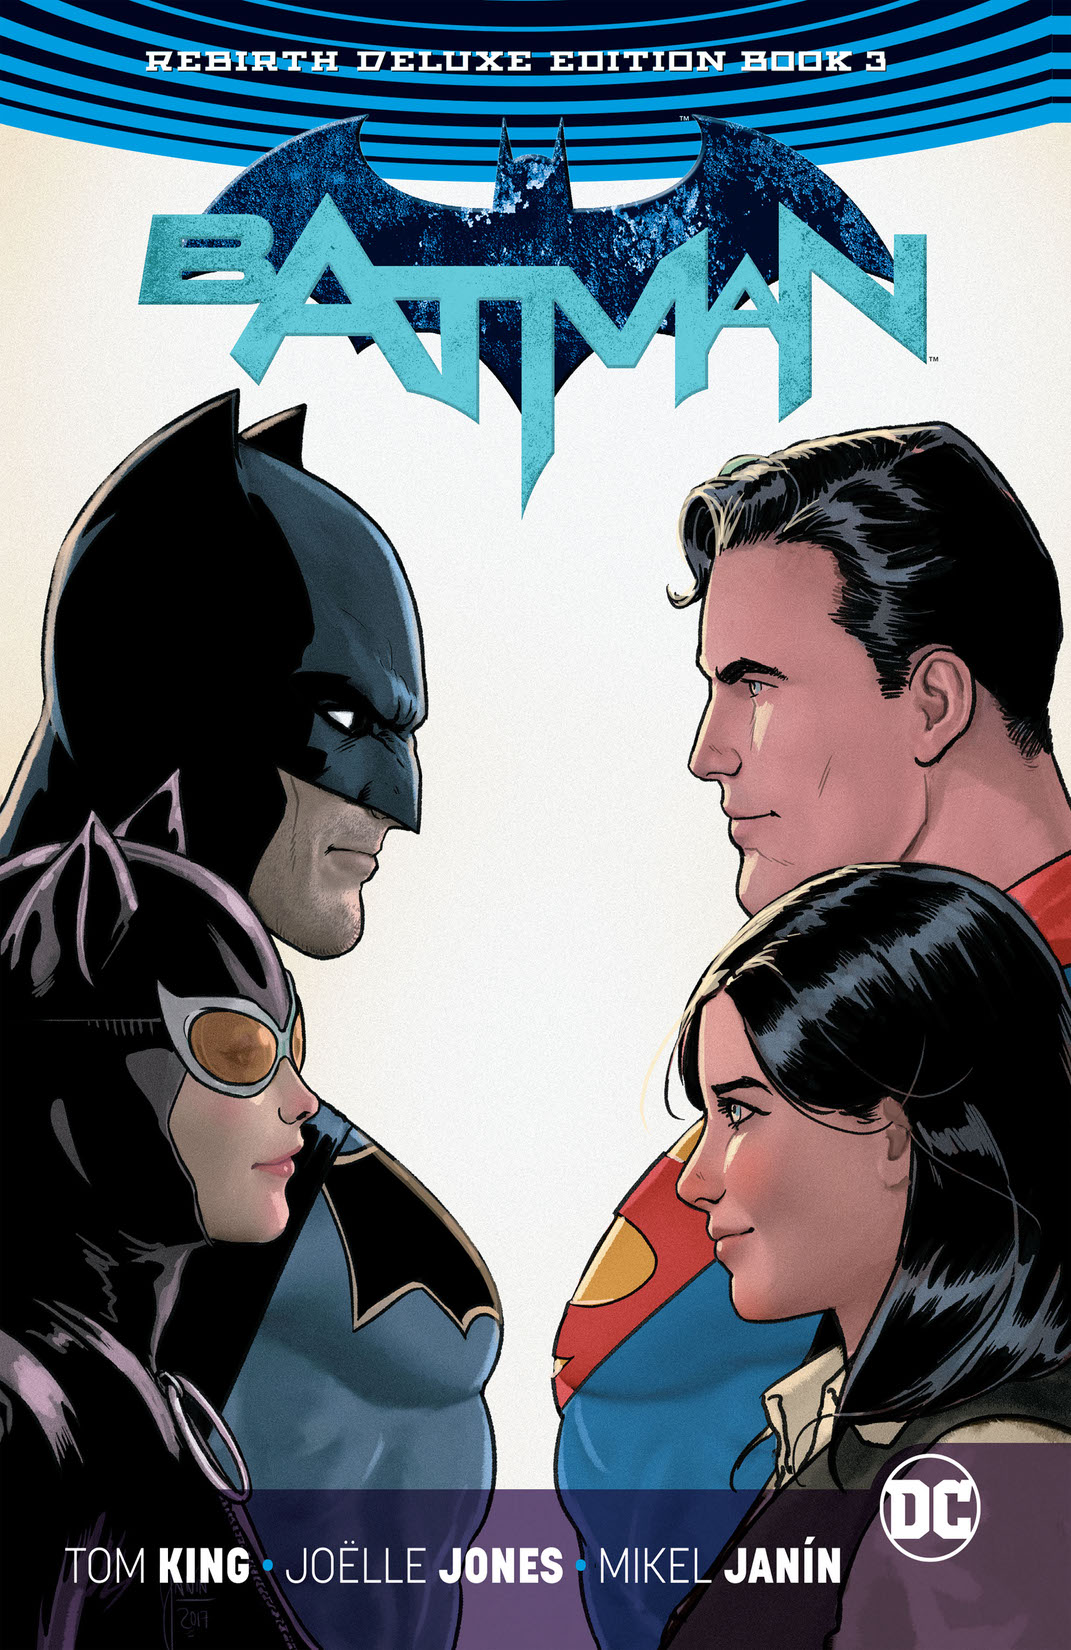 Batman: The Rebirth Deluxe Edition Book 3 preview images